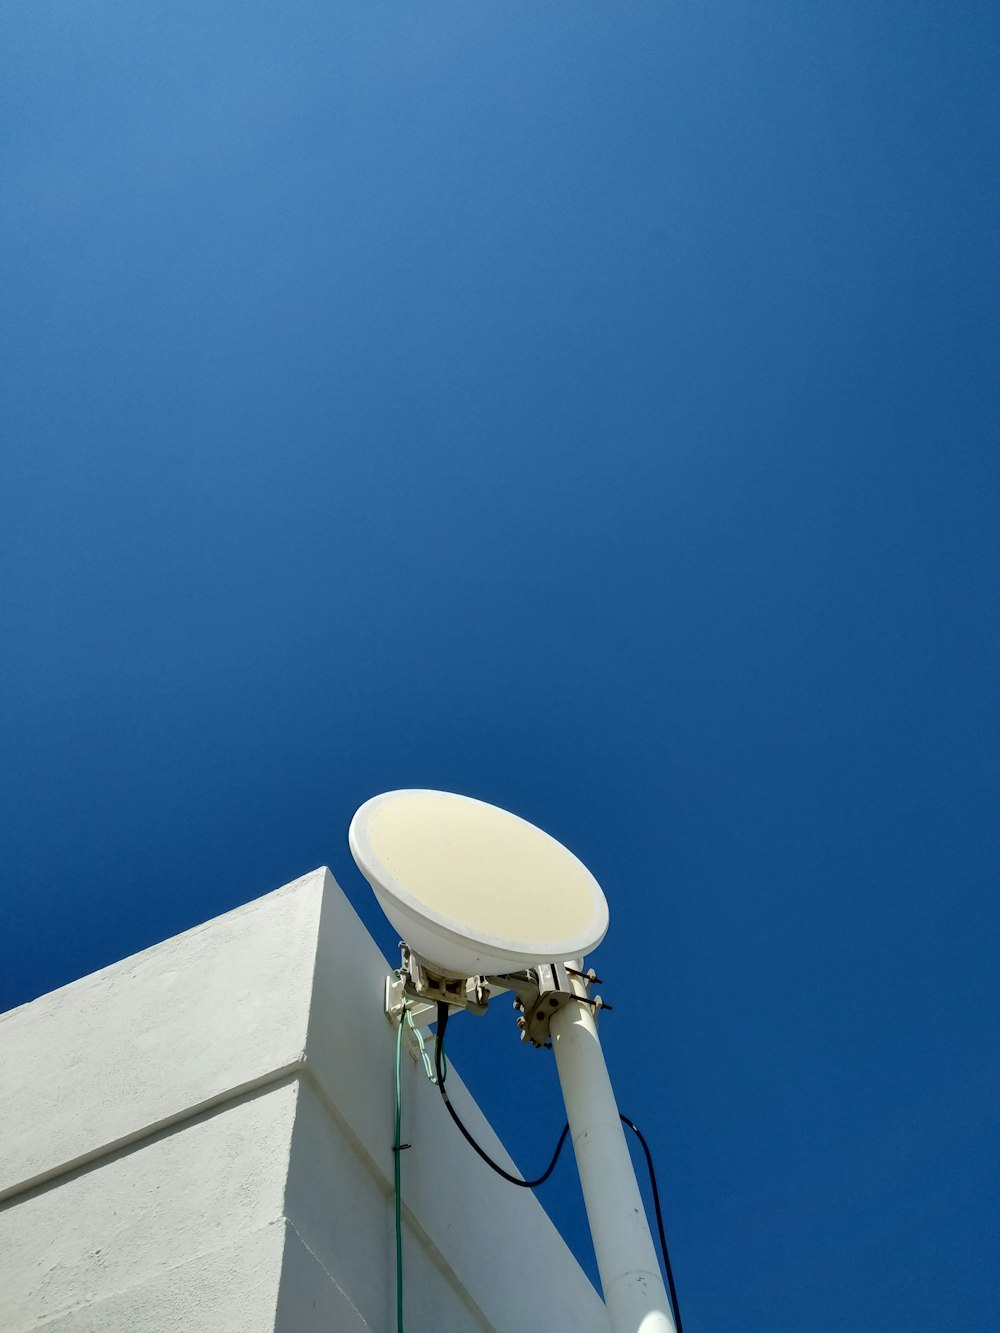 a satellite dish mounted on the side of a building